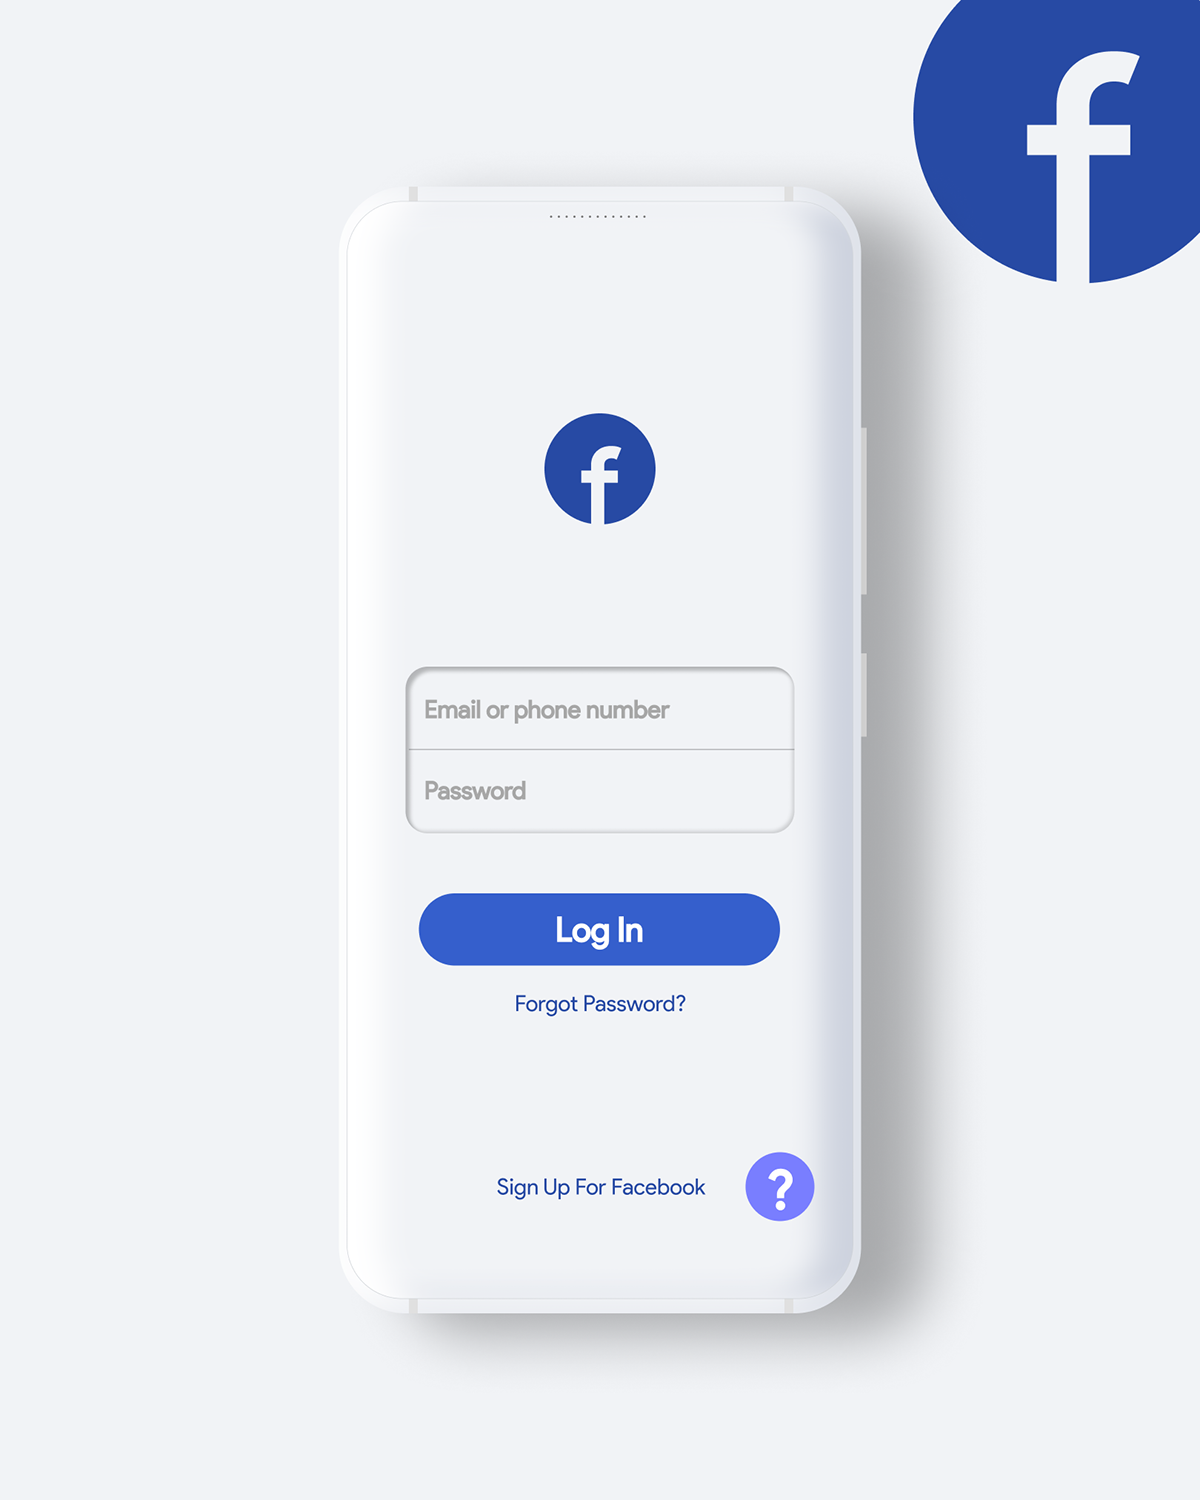 Facebook sign in page redesigned